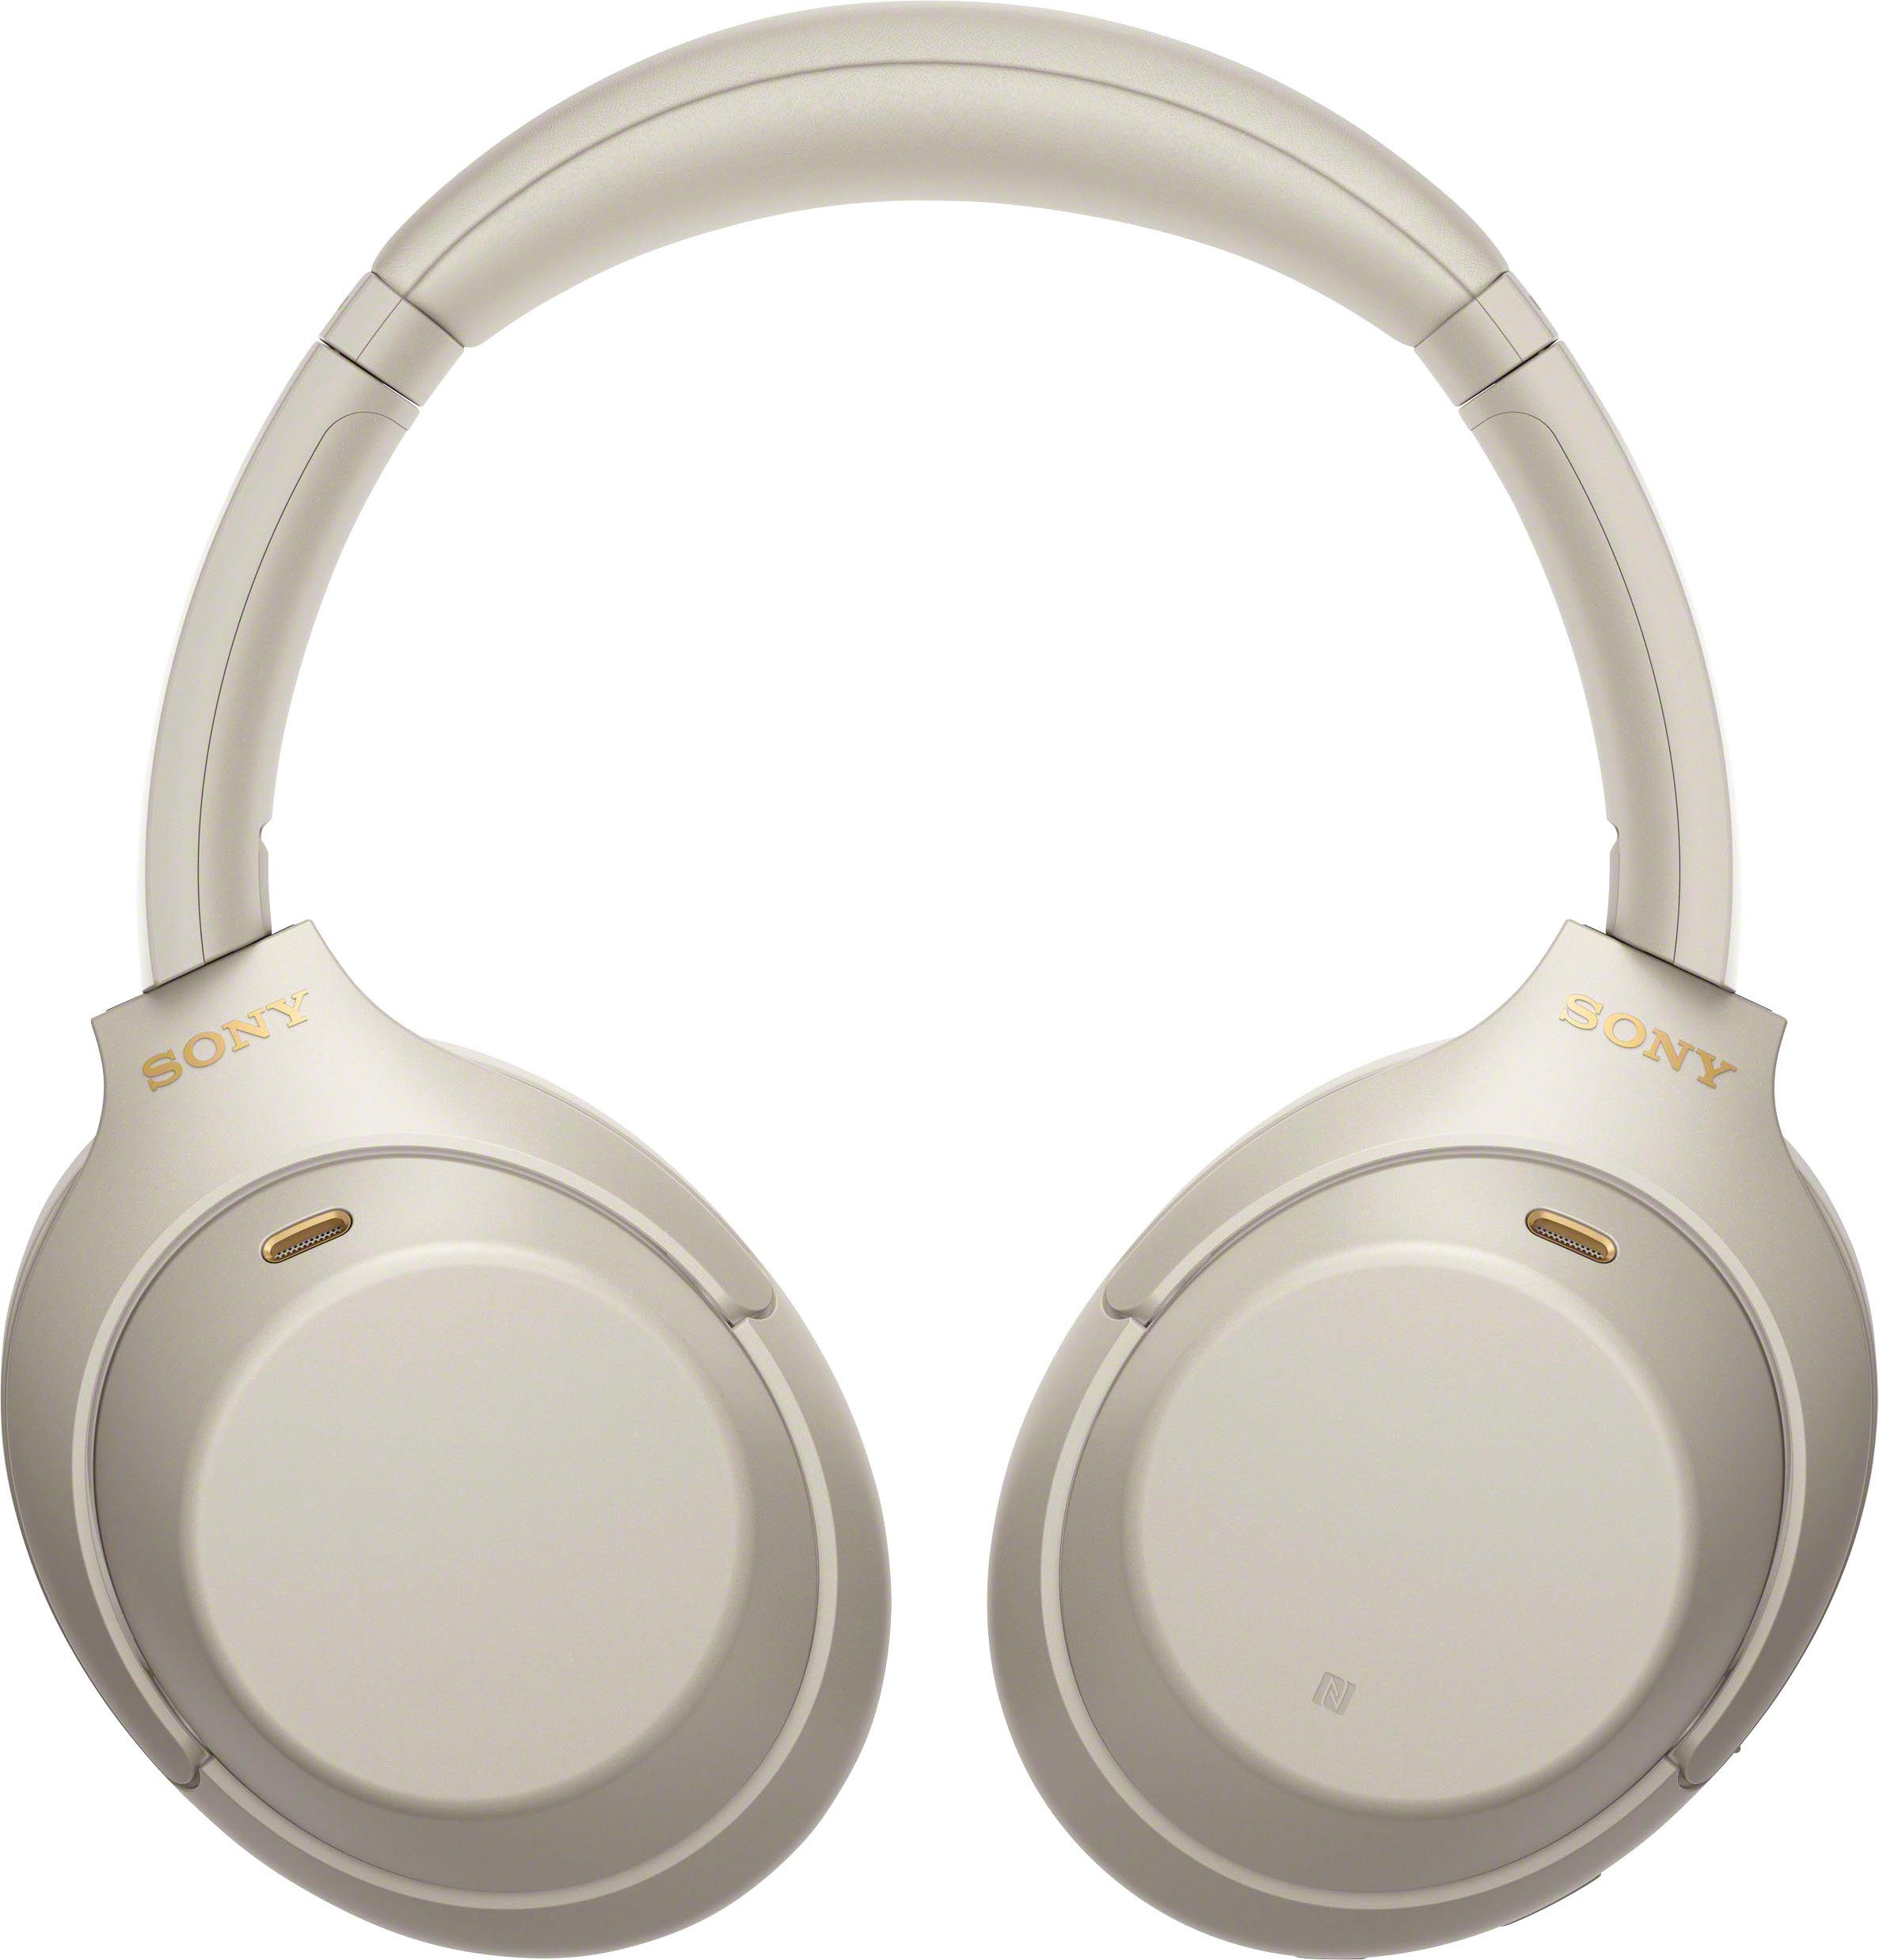 Sony WH-1000XM4 kabelloser Over-Ear-Kopfhörer (Noise-Cancelling, Schnellladefunktion) Sensor, NFC, One-Touch Touch NFC, Bluetooth, Silber Verbindung via